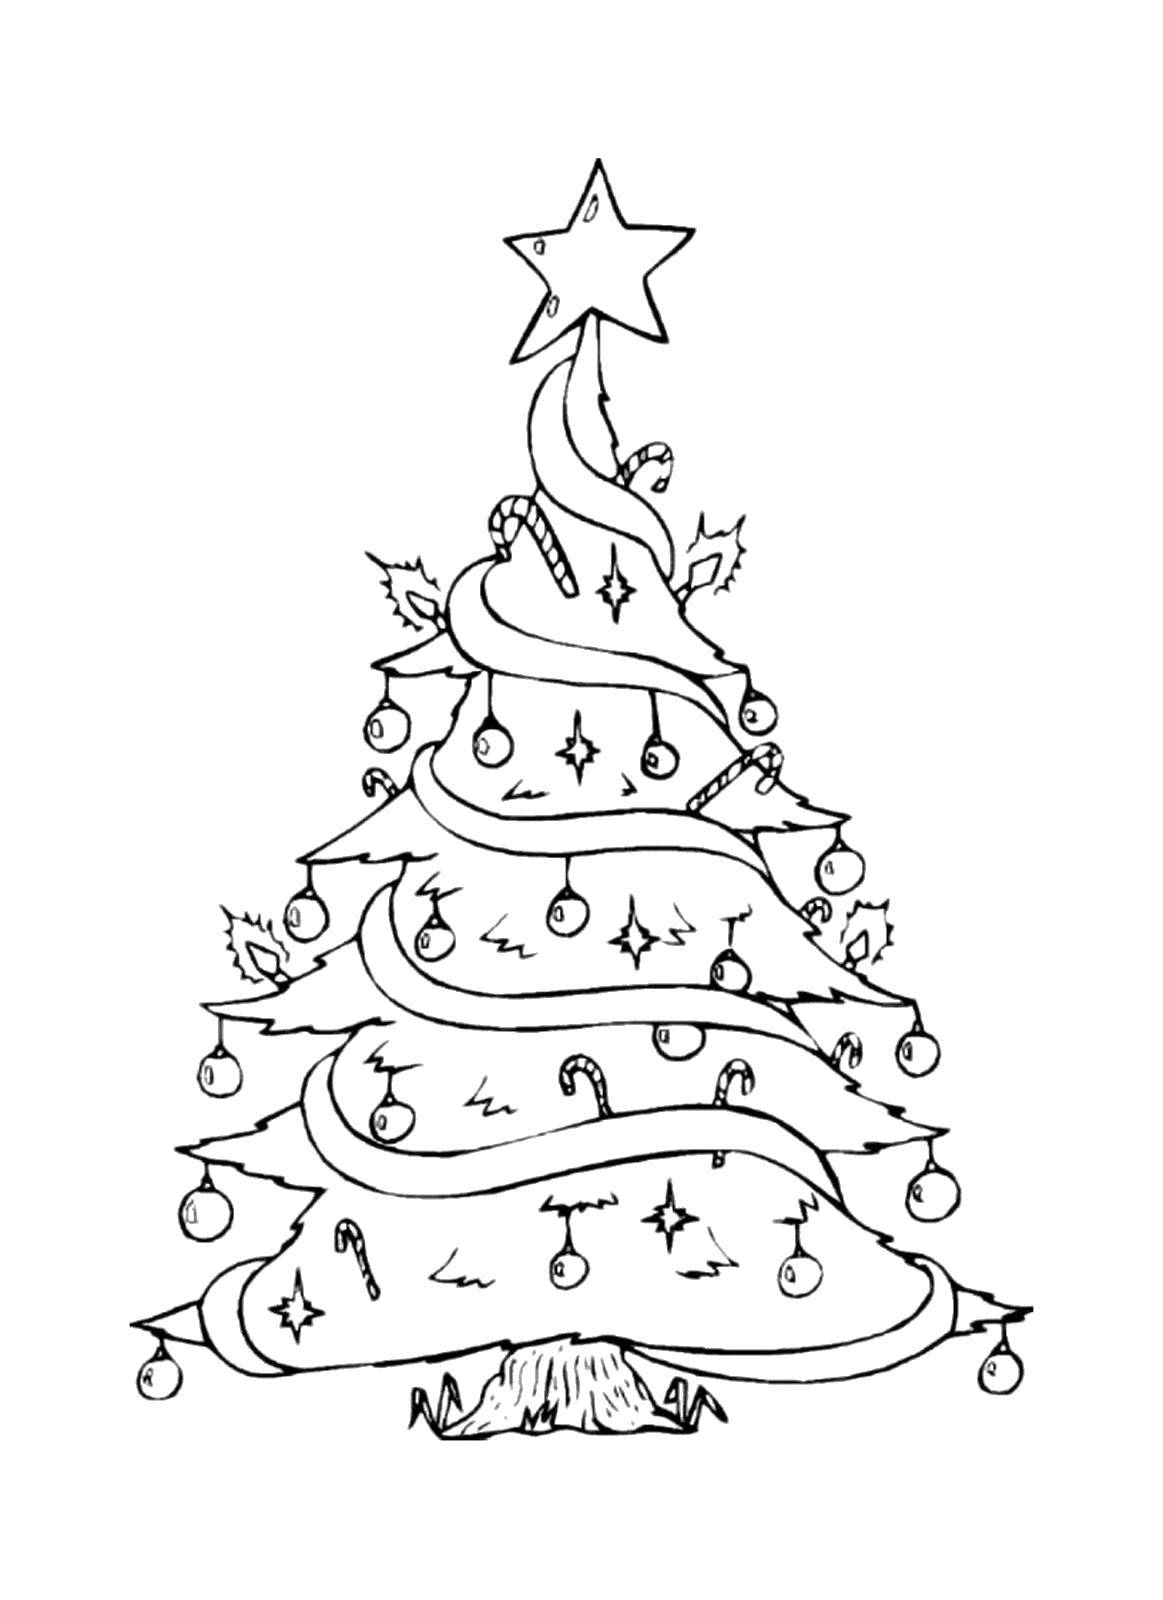 Coloring A real Christmas tree. Category coloring Christmas tree. Tags:  New Year, tree, gifts, toys.